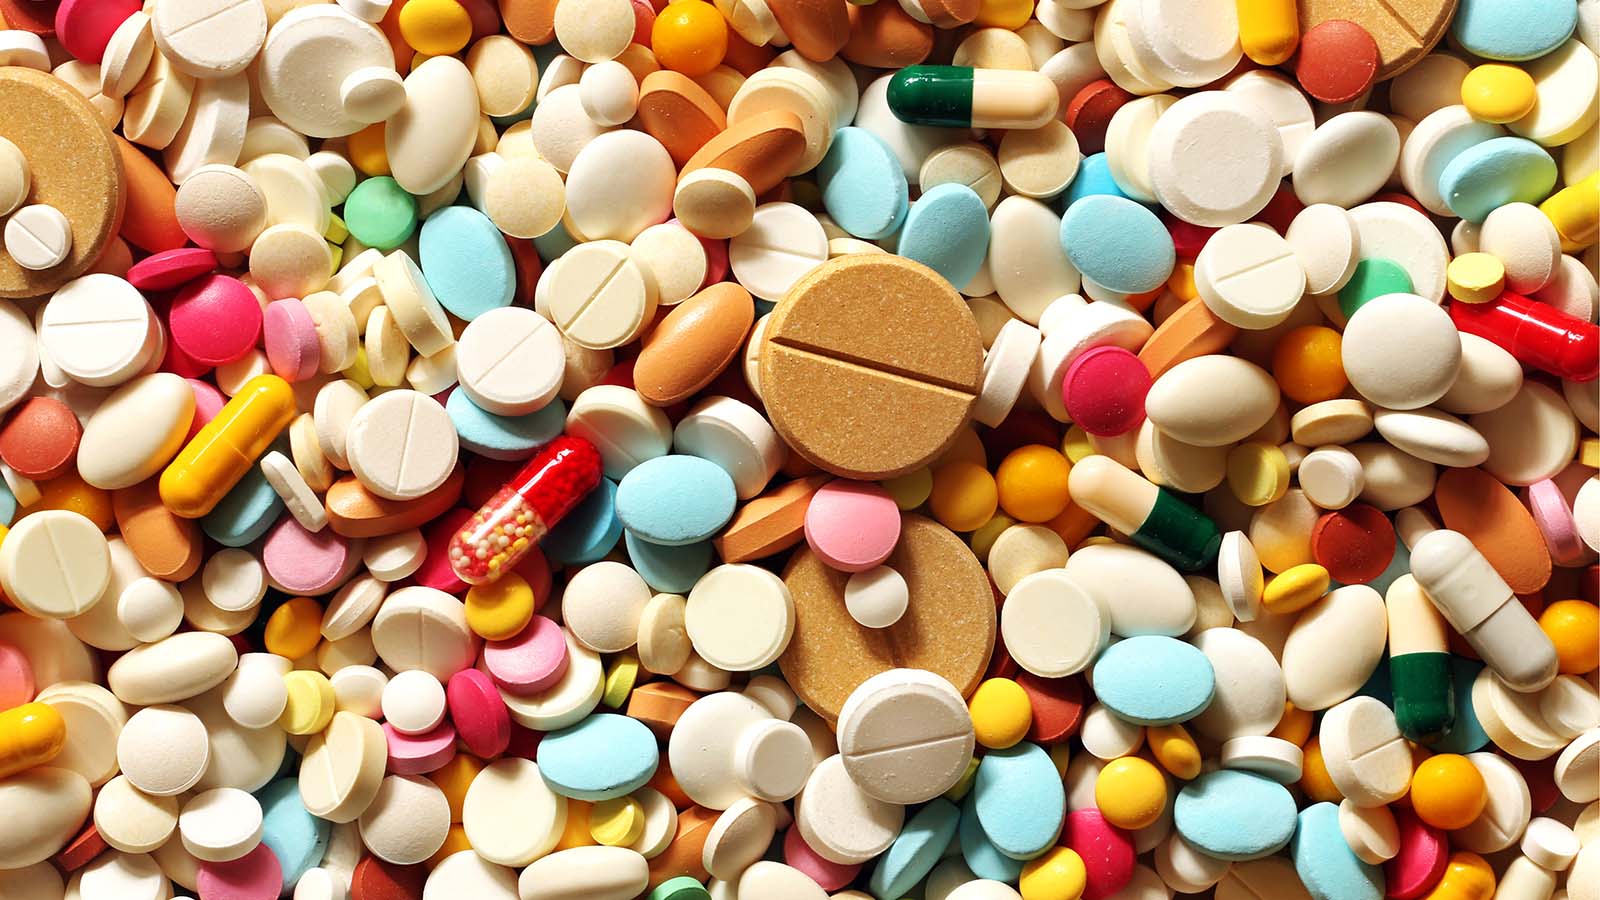 A pile of brightly colored pills in varying sizes and shapes representing KRBP stock.